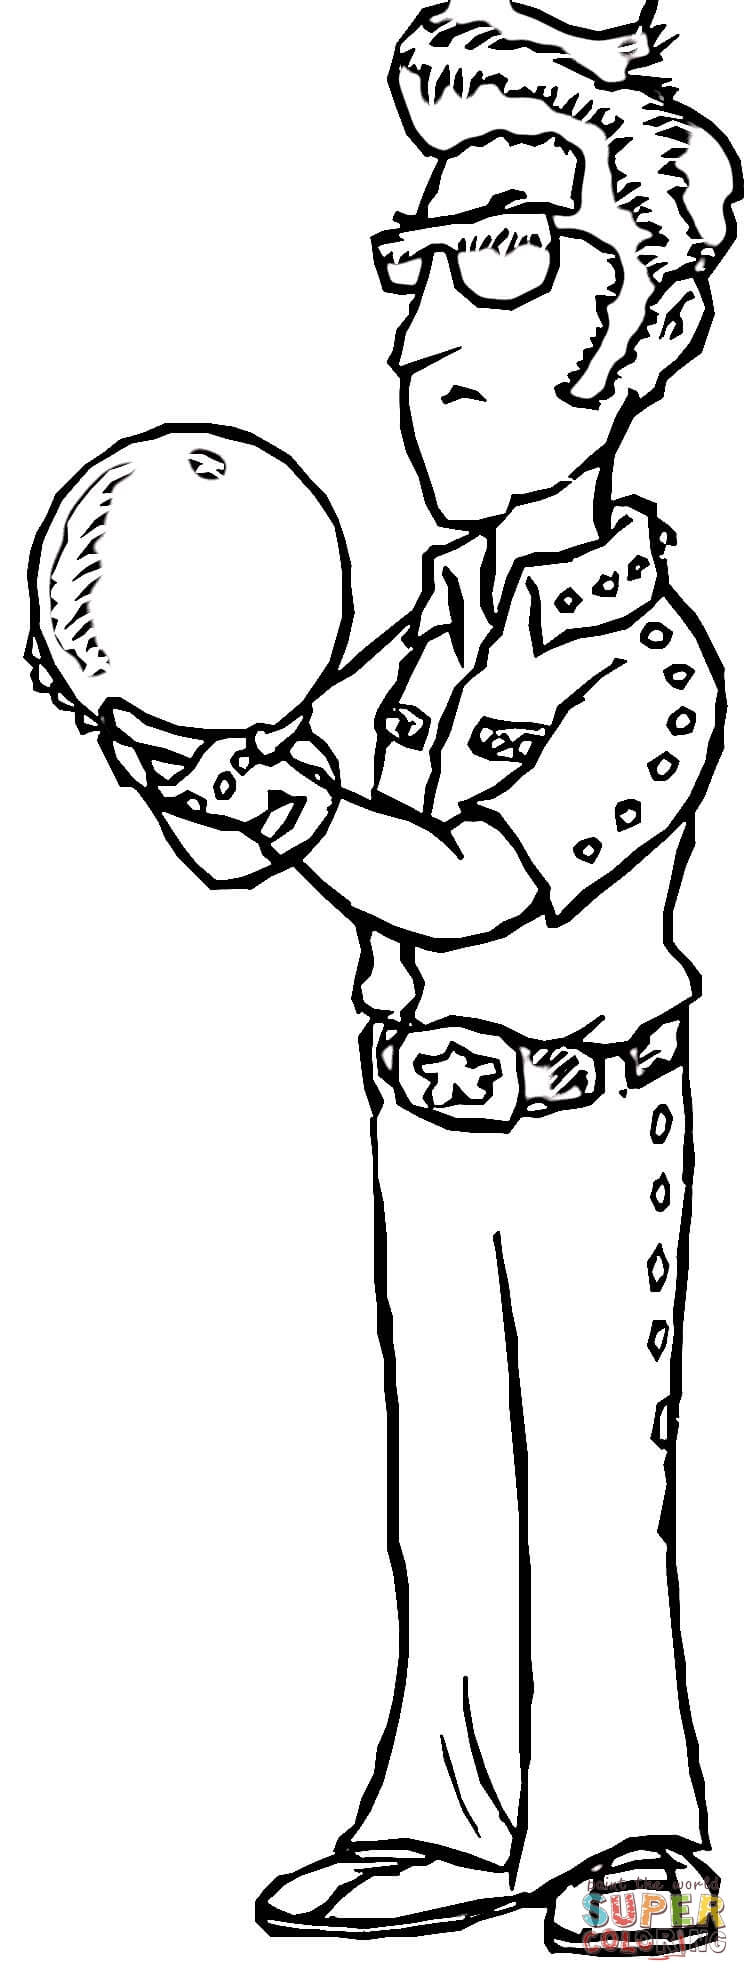 Elvis coloring page | Free Printable Coloring Pages